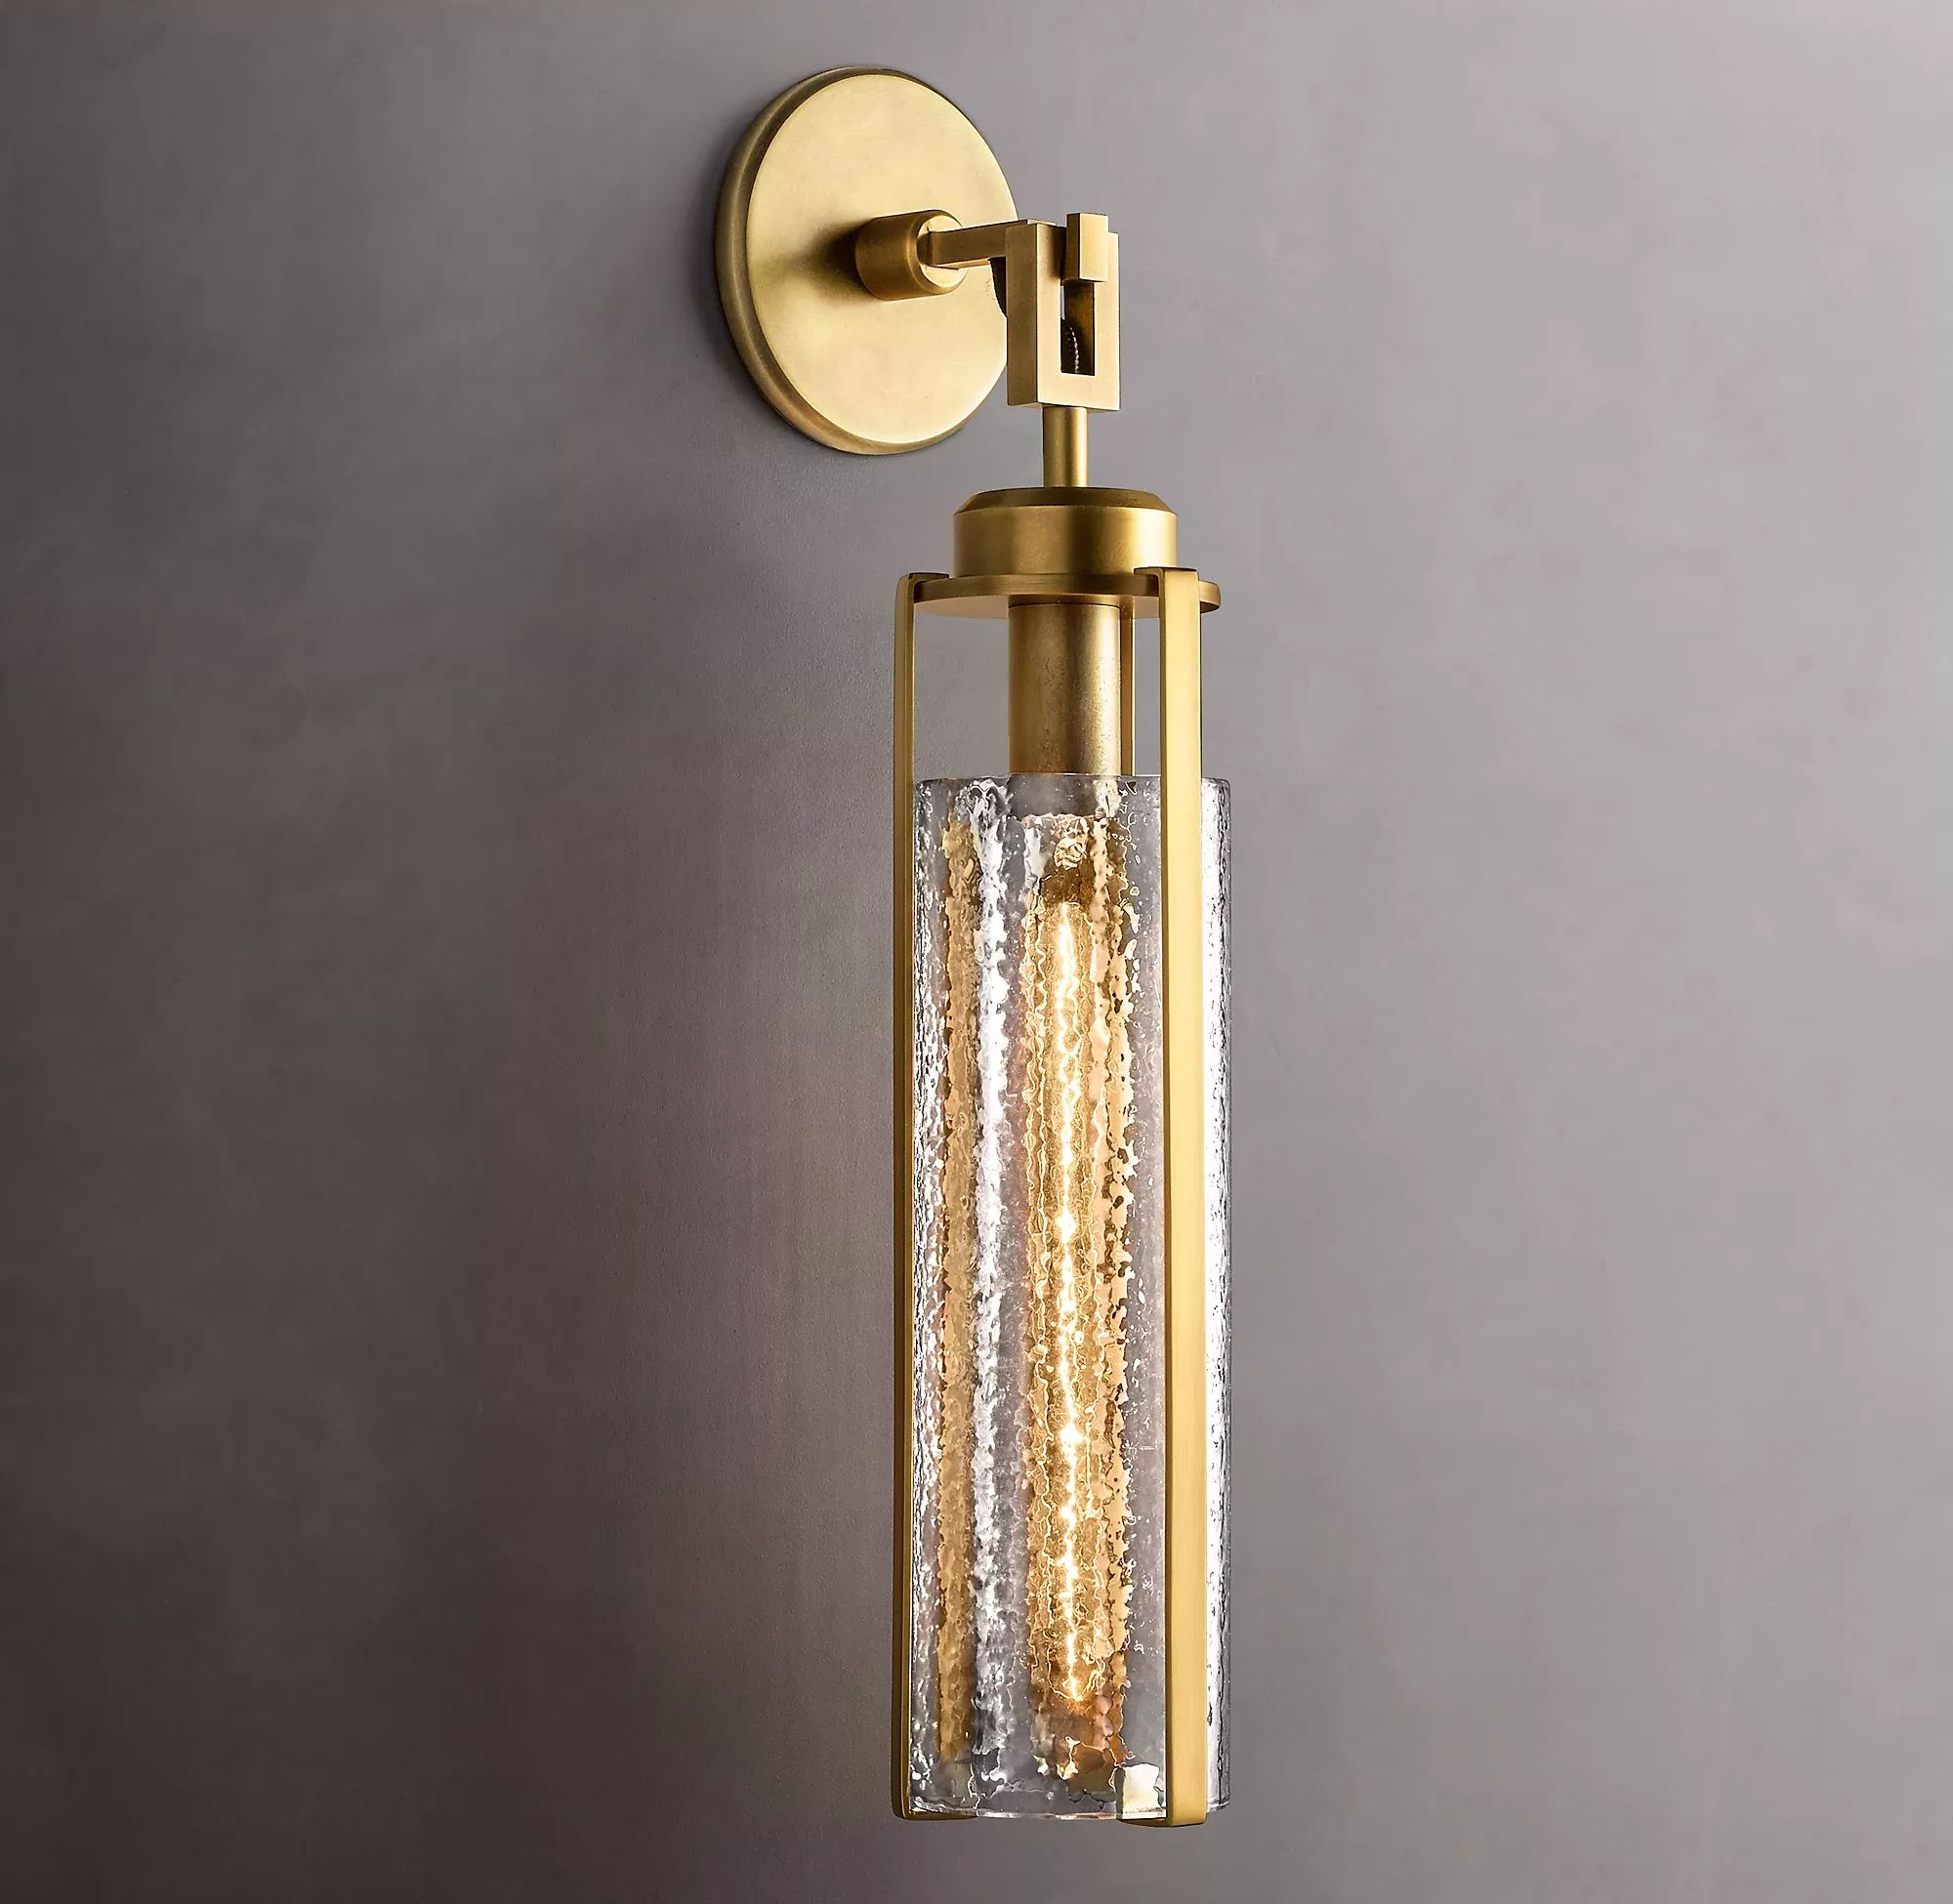 Bamcee Finish Glass Shade Wall Sconces